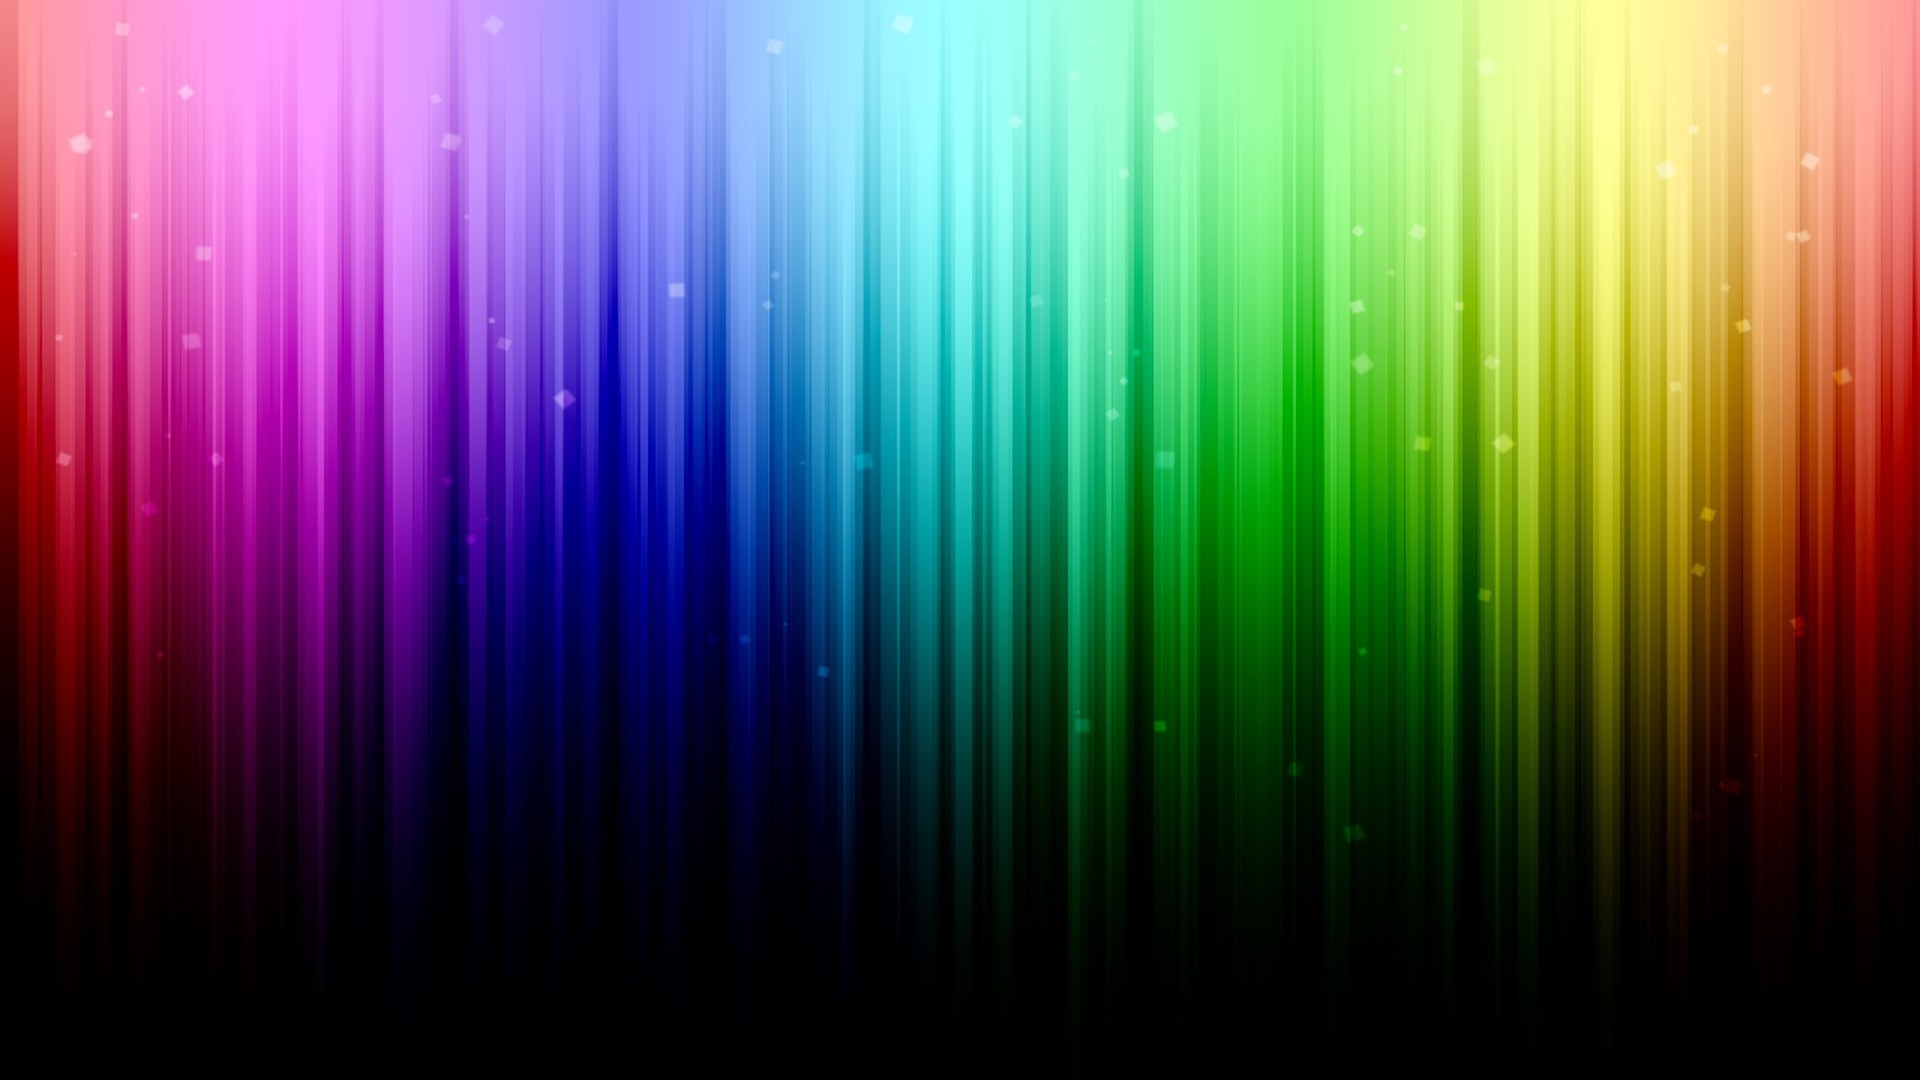 bright and colourful wallpapers,green,blue,purple,violet,light